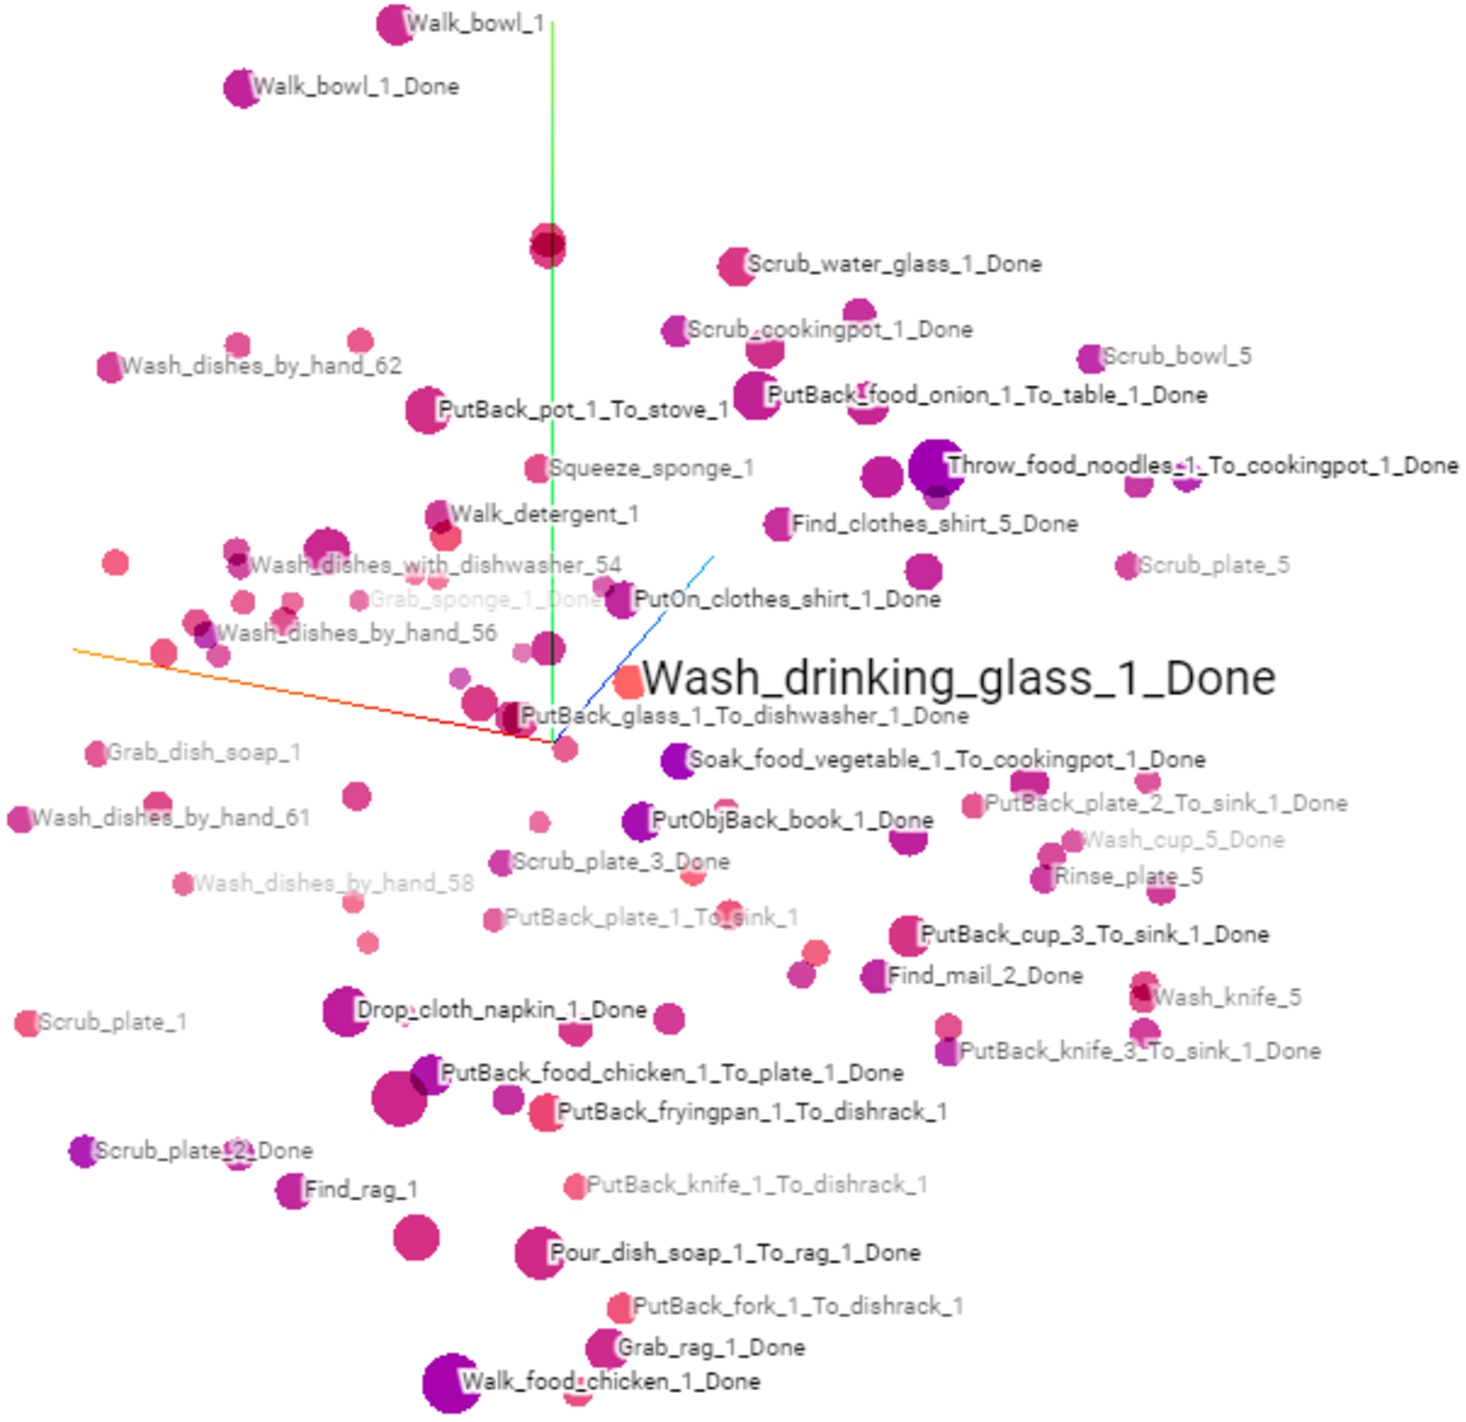 Trained embeddings of activities, states and actions that were merged and visualised in a 3-dimensional space in the tensorflow projector. The colouring of the embedding vectors (visualised as dots) shows how distant other embedding vectors are from a selected embedding vector (here, e.g. in light red Wash_drinking_glass_1_Done). The darker the hue of a neighbouring embedding vector, the closer it is to the selected vector. The distances in this figure were measured with the Euclidean distance.